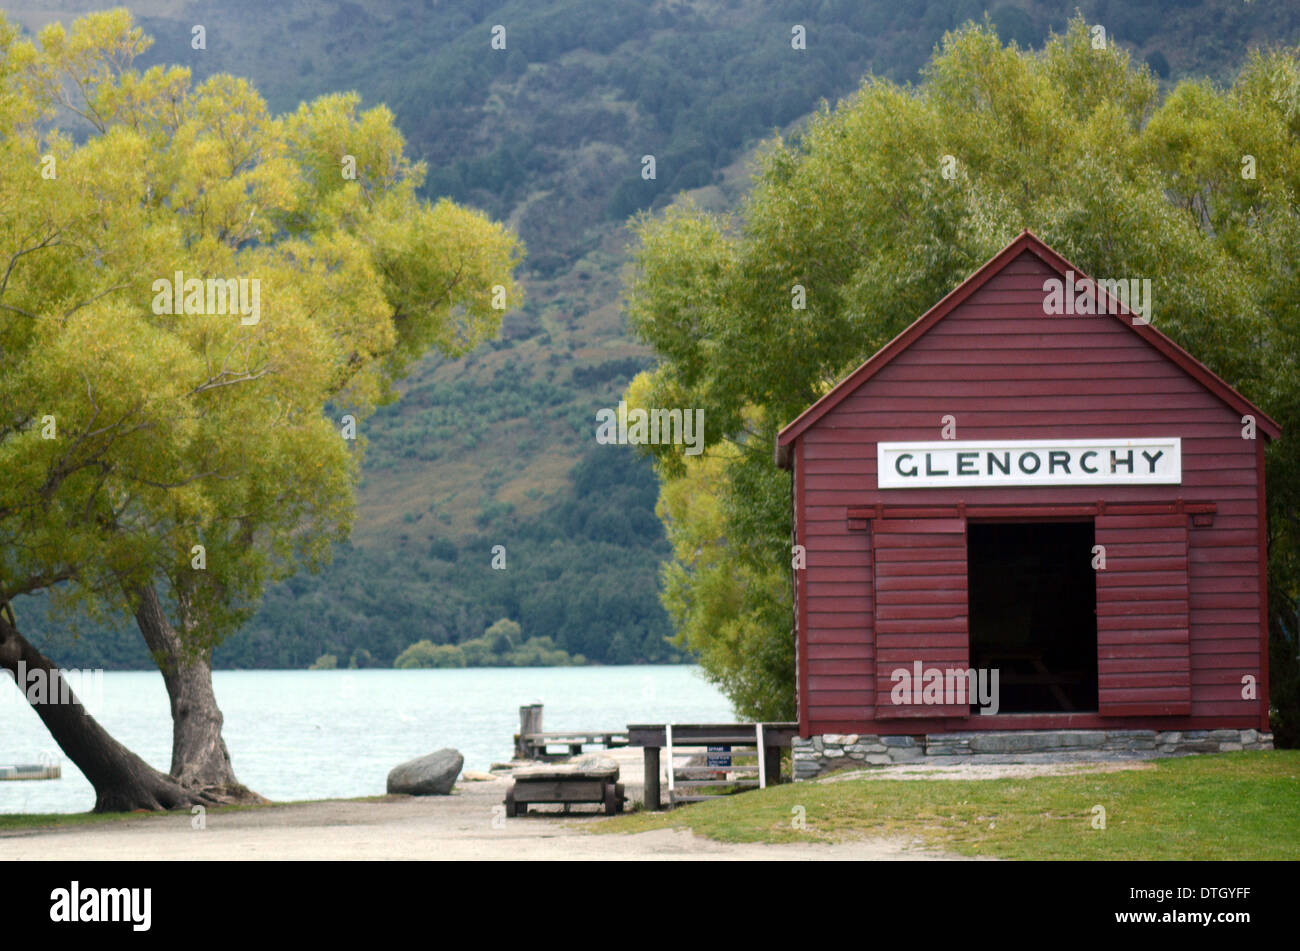 An old Boatshed in Glenorchy wharf in the south island of New Zealand Stock Photo